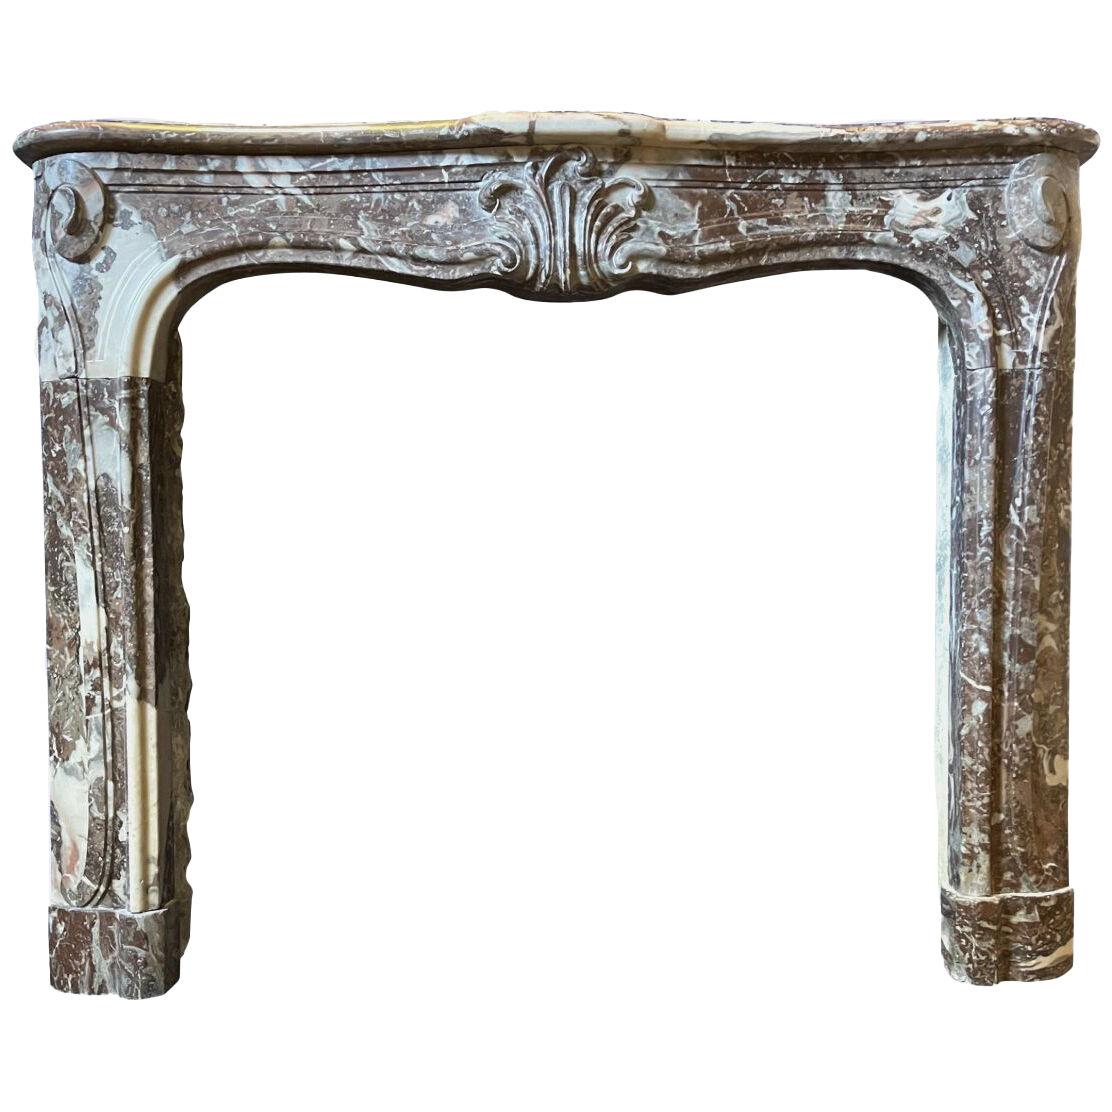 An Antique 18th Century French Marble Fireplace Mantel 